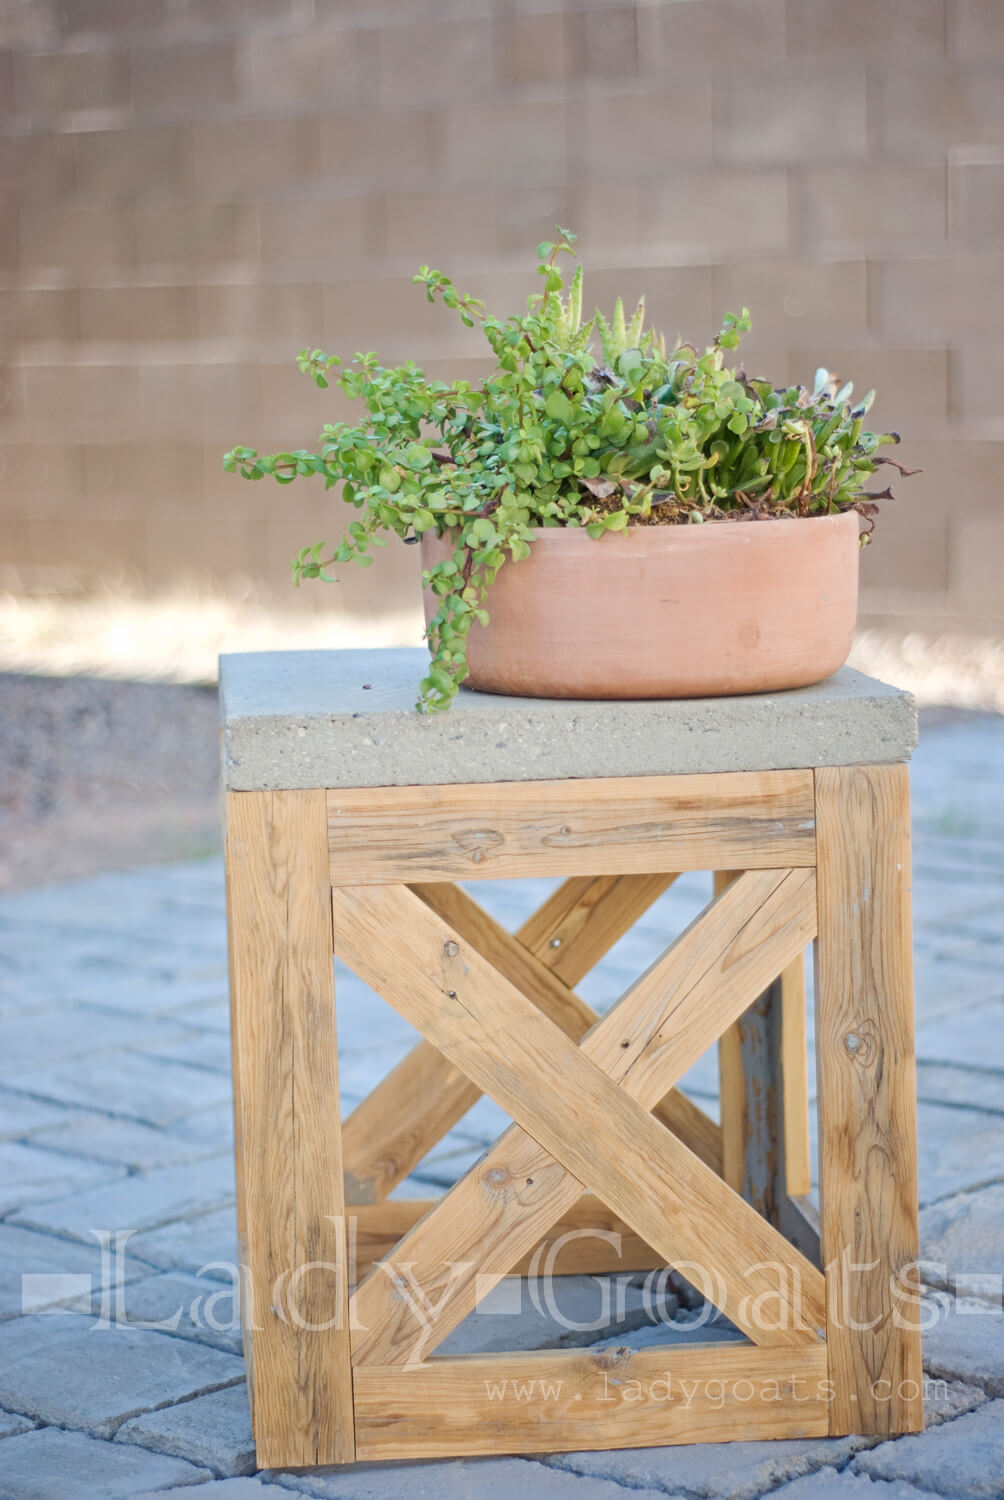 15 Interesting DIY Patio Ideas You Need To Craft For The Summer